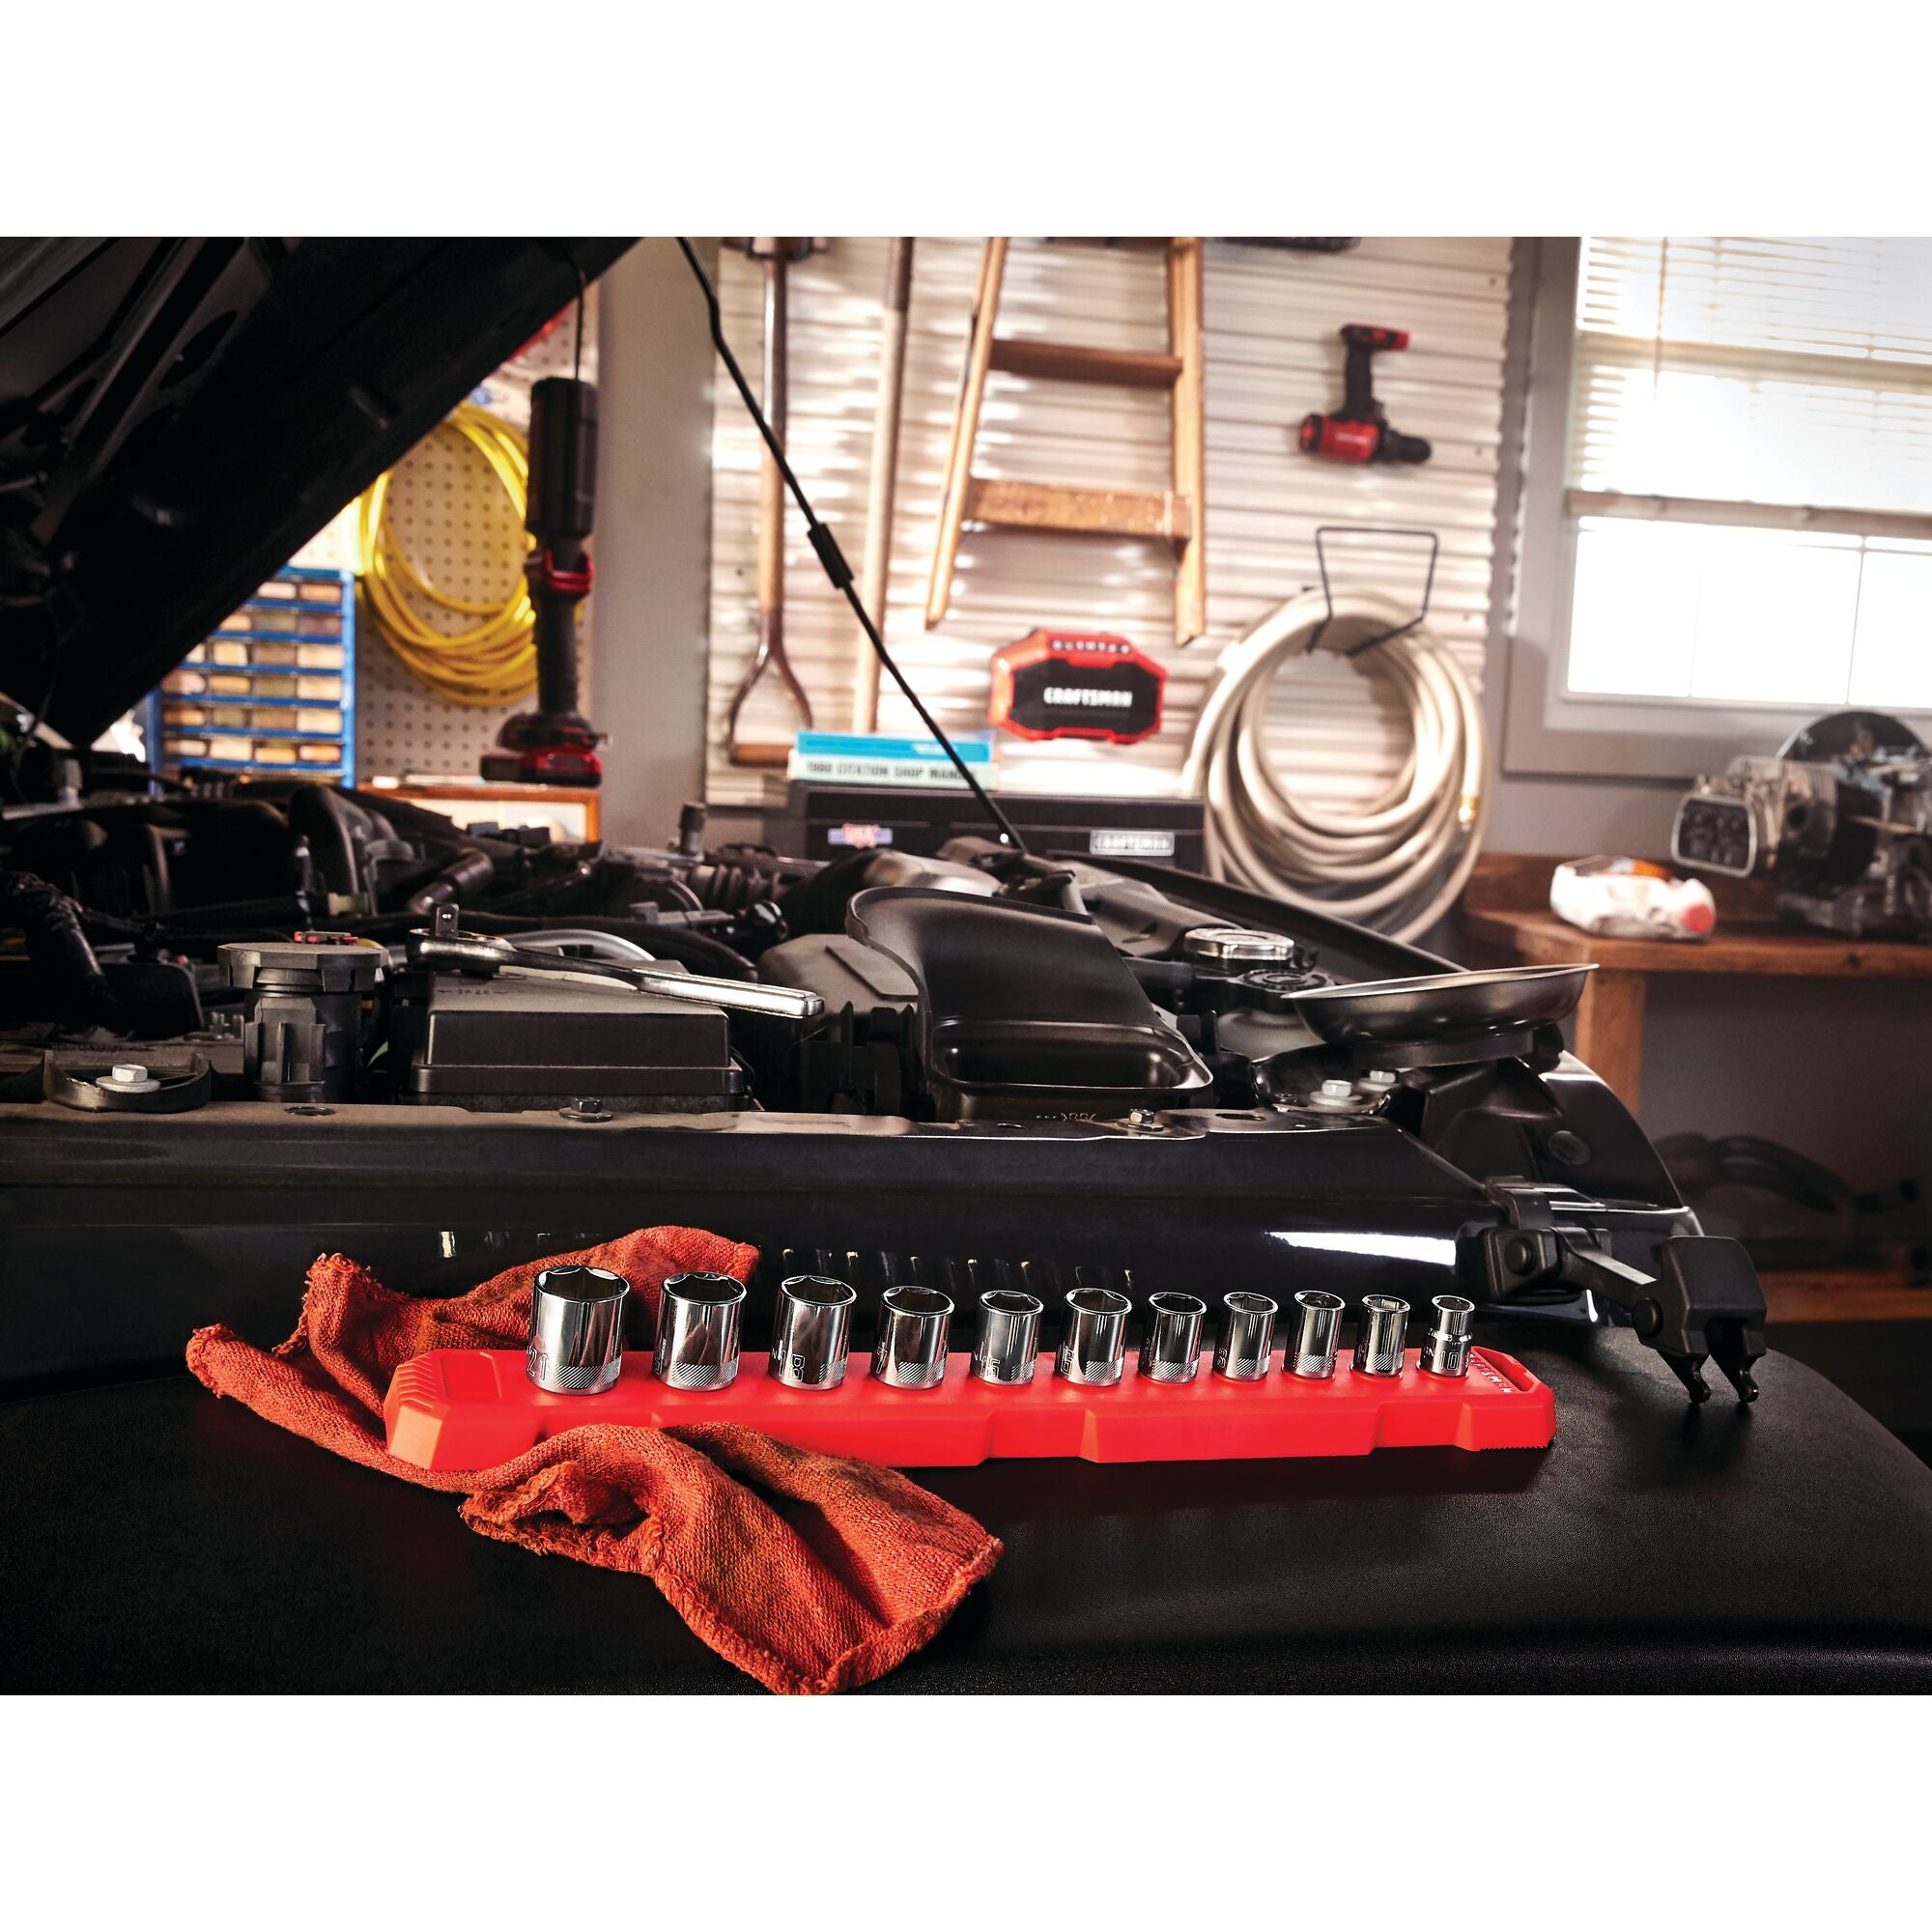 11 piece 3 eighths inch drive metric 6 point socket set placed near an open vehicle engine.